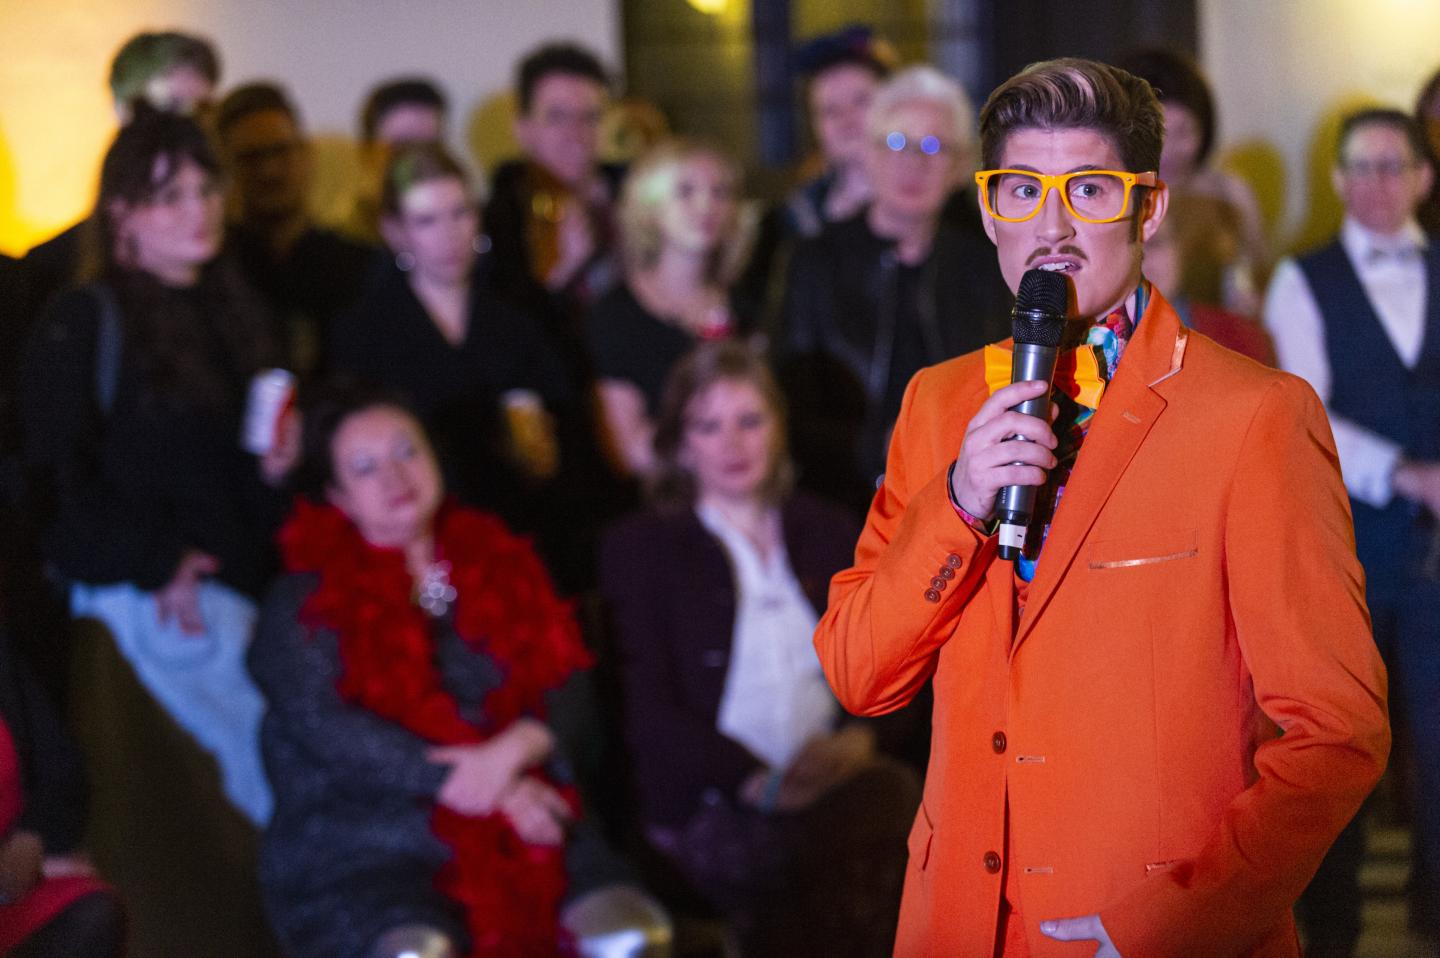 Adam All wears a bright orange suit with matching glasses and a bow tie and speaks into a microphone with an audience behind them